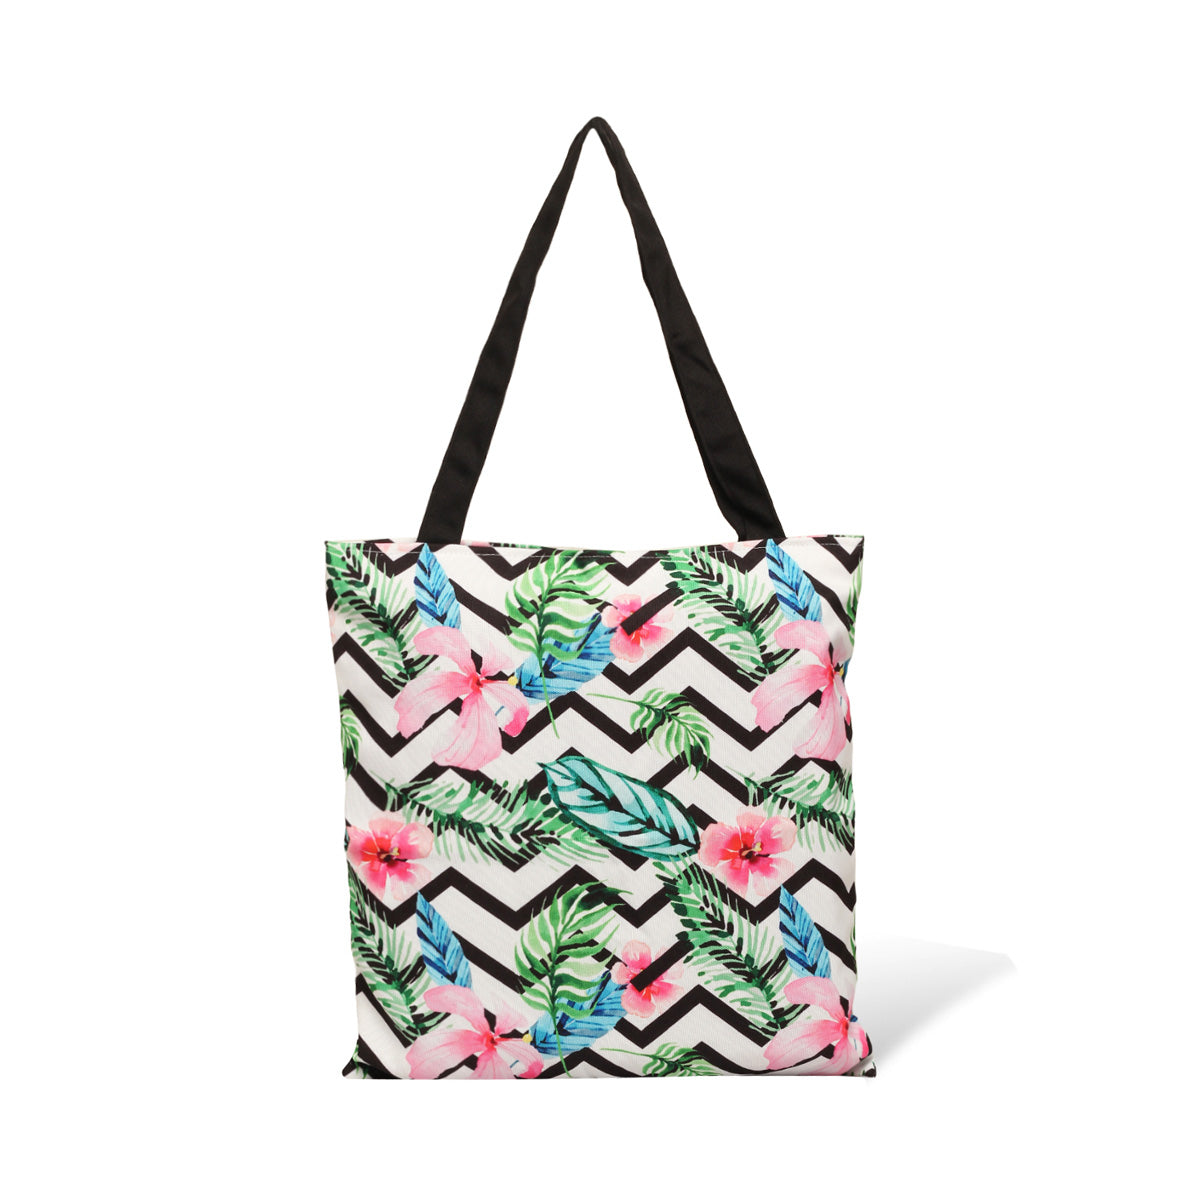 Stylish tote bag featuring tropical design and black handles.